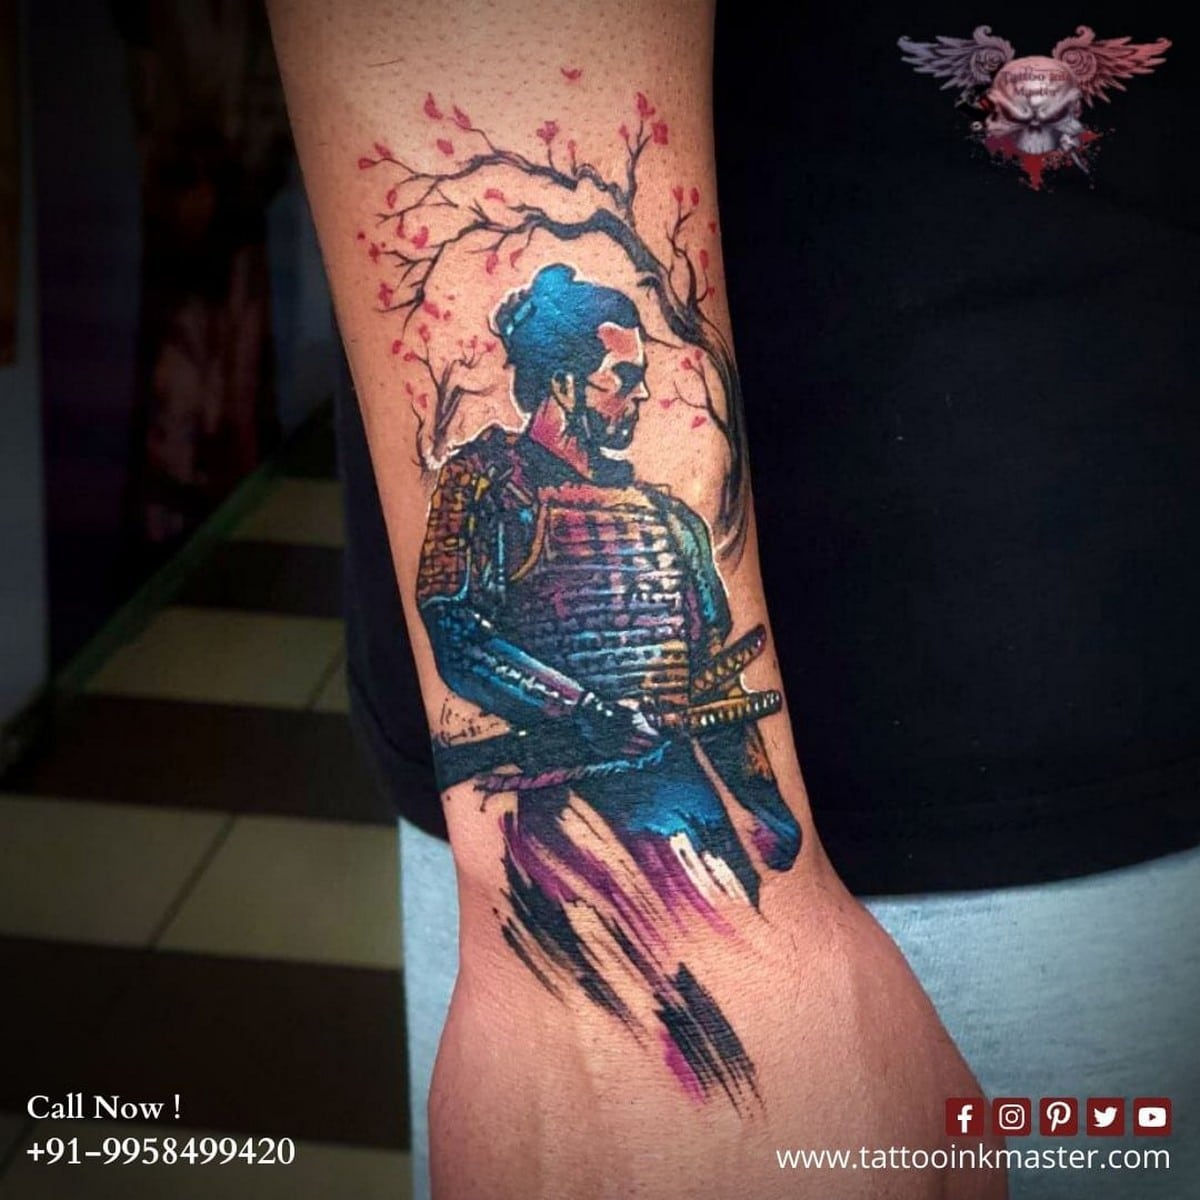 Realistic warrior tattoo done at our studio recently. ⠀ Send us a DM to  discuss your next tattoo! ⠀ #warriortattoo #sleevetattoo… | Instagram